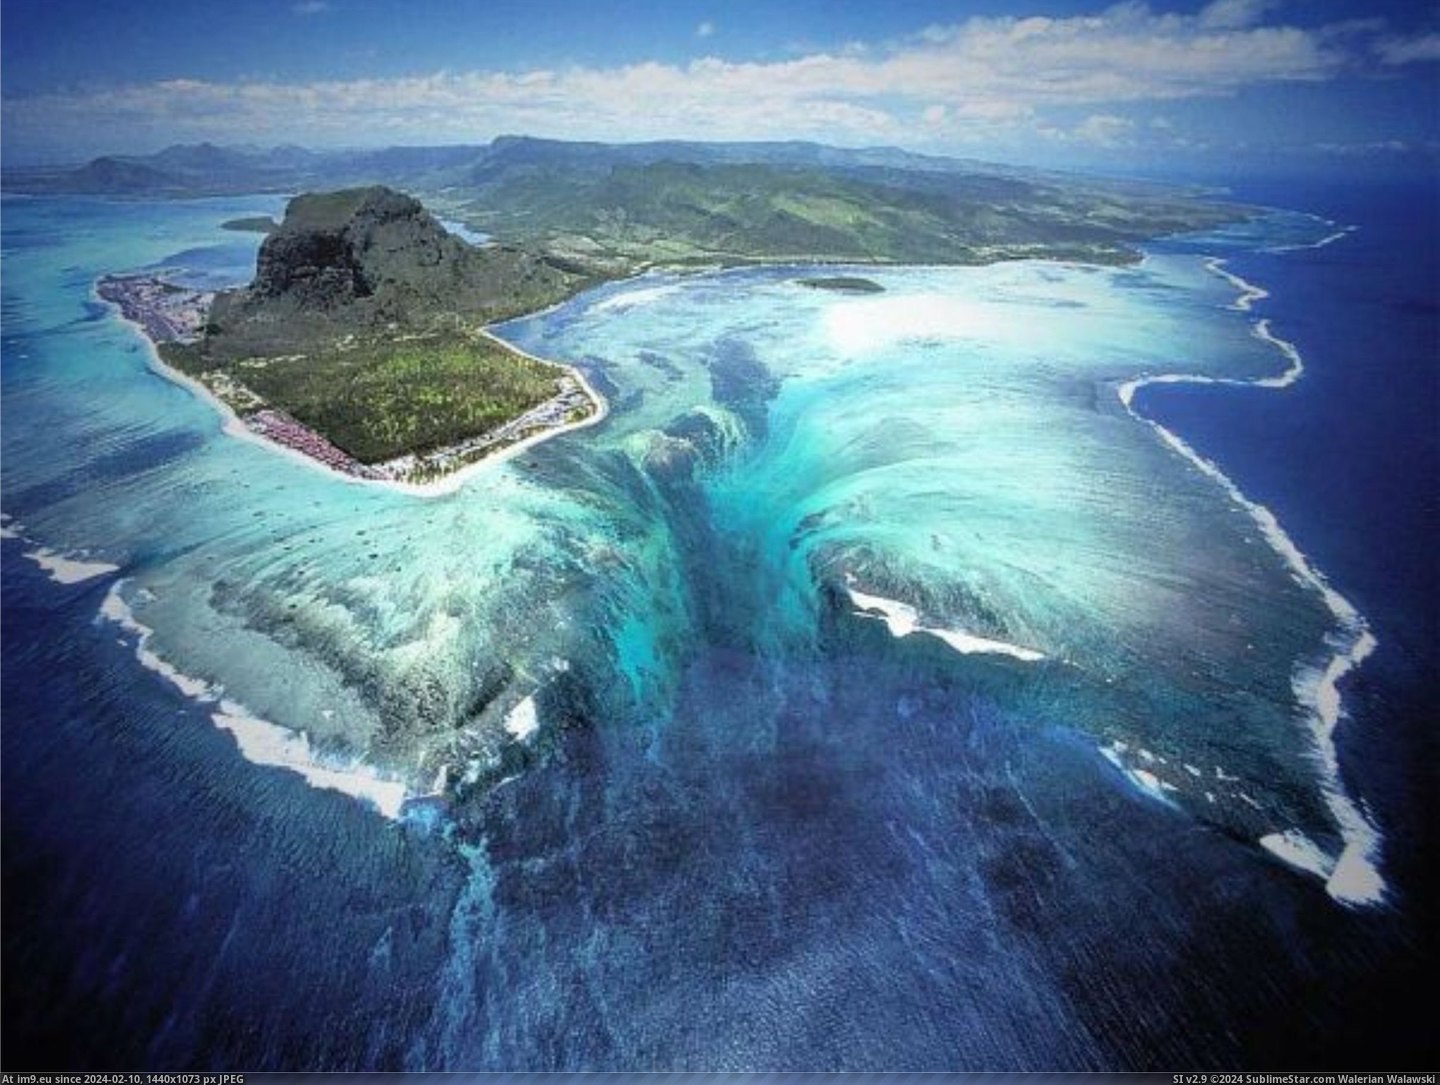 #Wallpapers #Island #Michael #Mauritius #Friedel #Underwater #Enormous #Plateau [Earthporn] Enormous underwater plateau - Island of Mauritius - by Michael Friedel [2420x1815] Pic. (Bild von album My r/EARTHPORN favs))